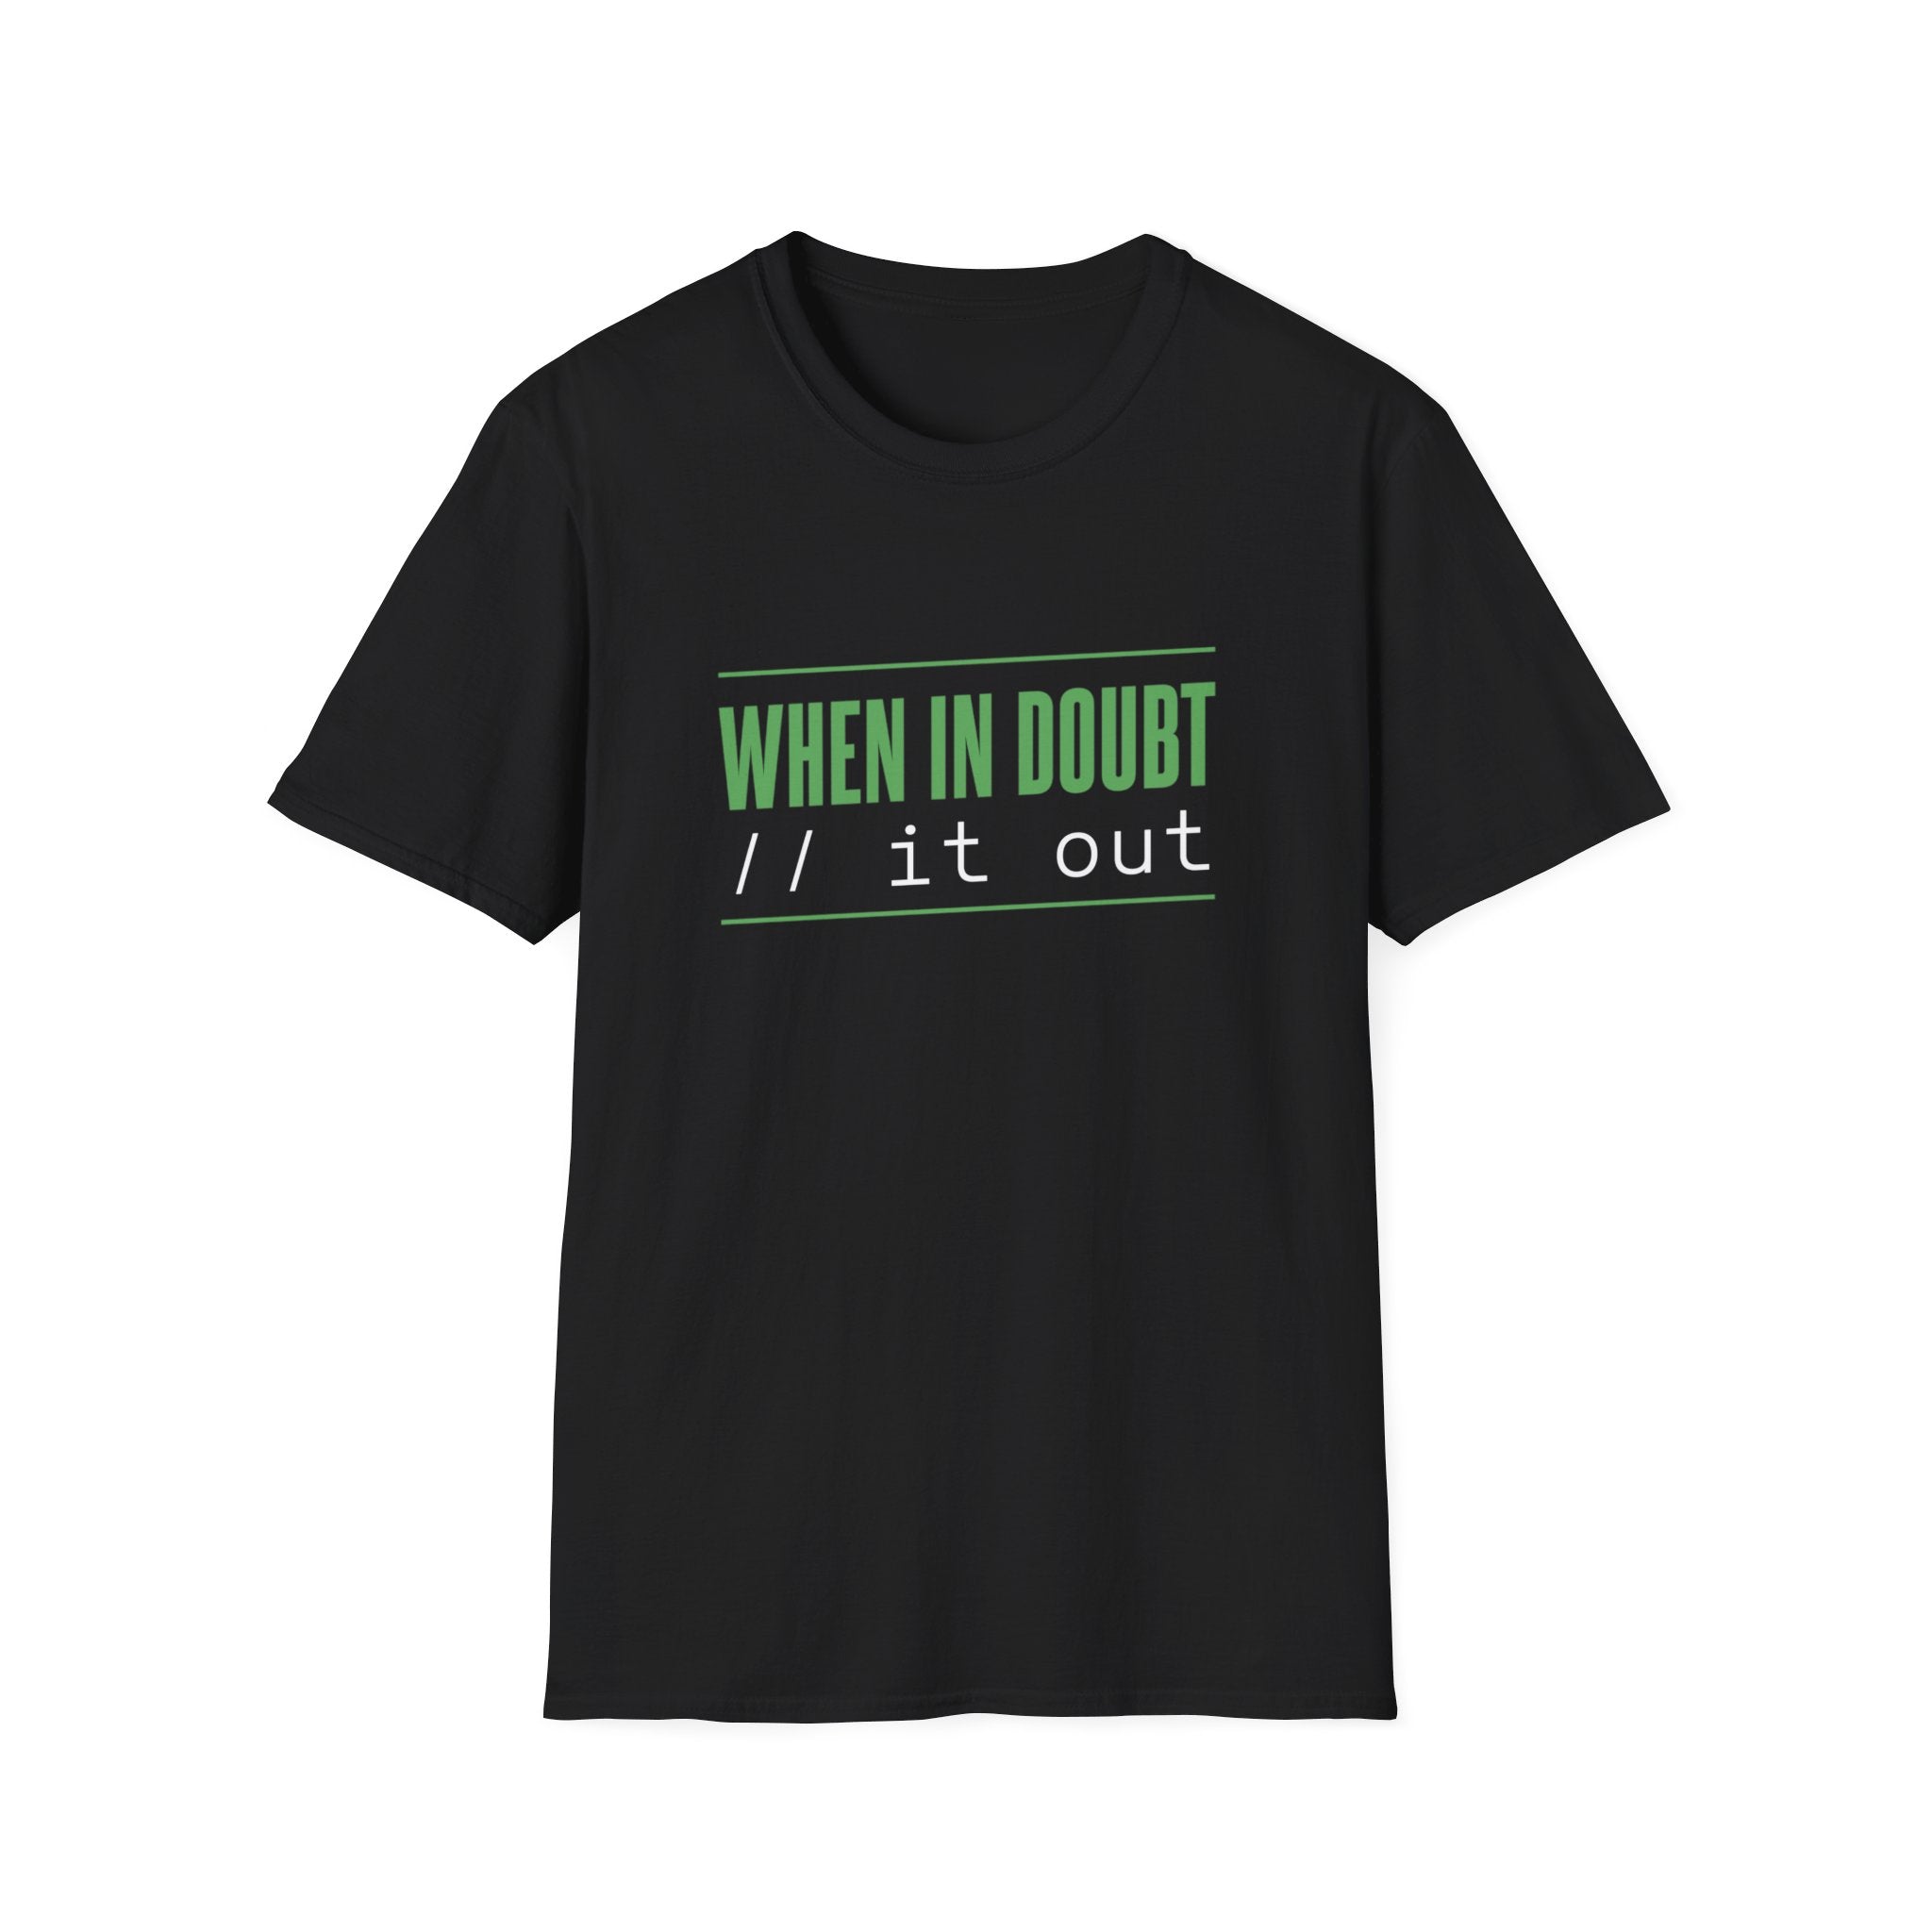 When In Doubt // it out T-Shirt